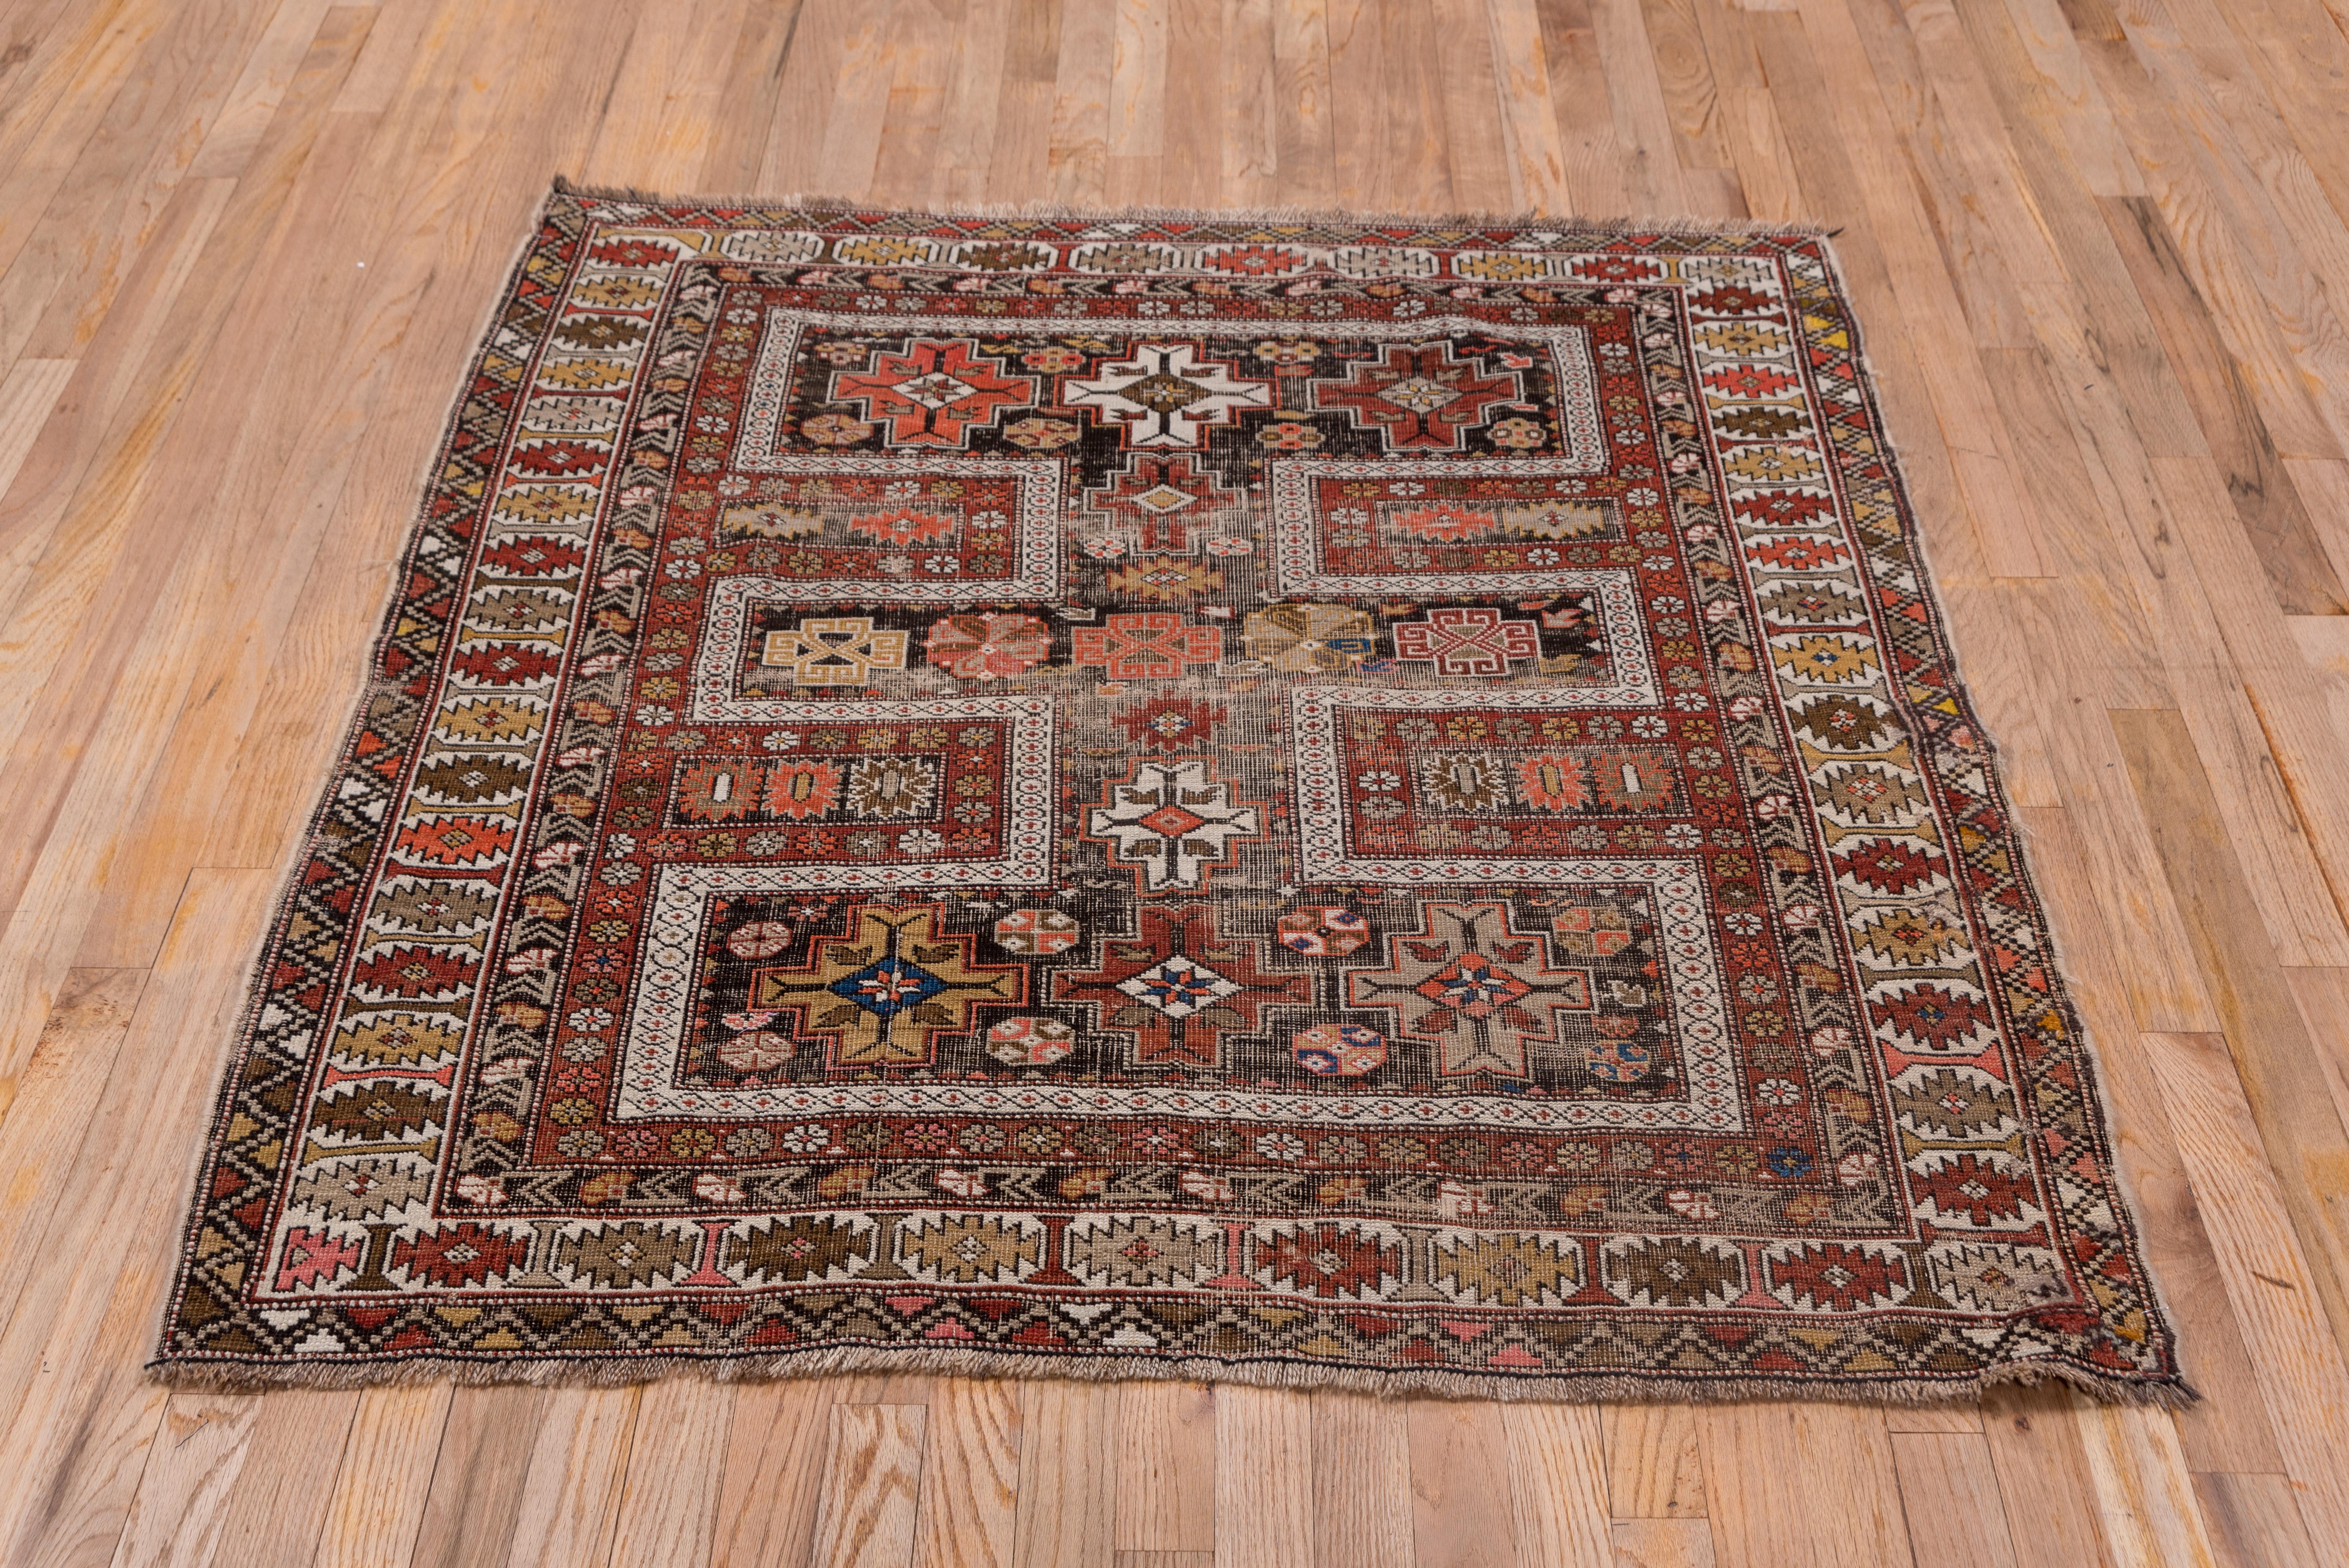 This well-filled east Caucasian rug shows a barred H pattern in ecru, enclosing stepped cross motives in brown-red, straw and pale blue all set on a brown-red grolund. The main ivory border features an ashik chain.